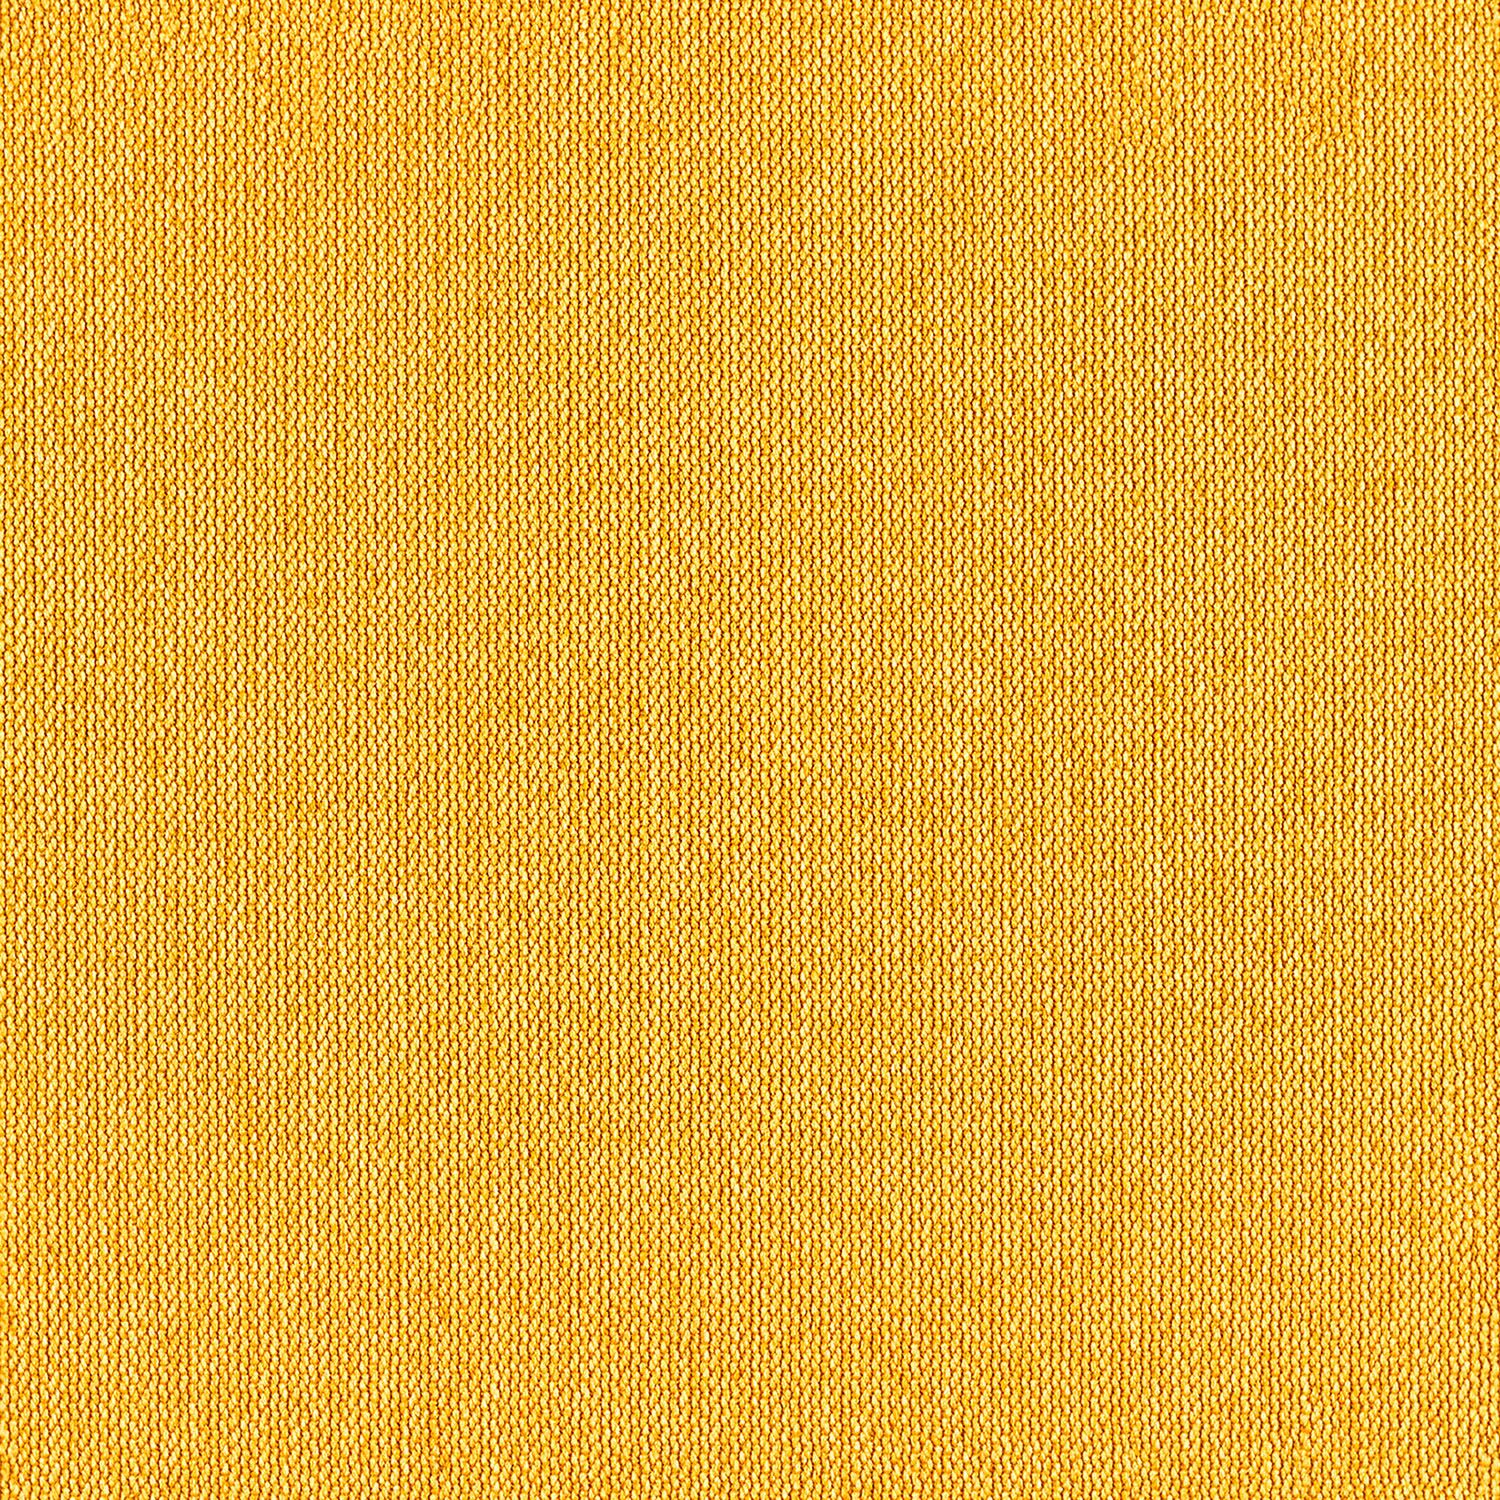 Percept - Radiant - 4040 - 24 Tileable Swatches